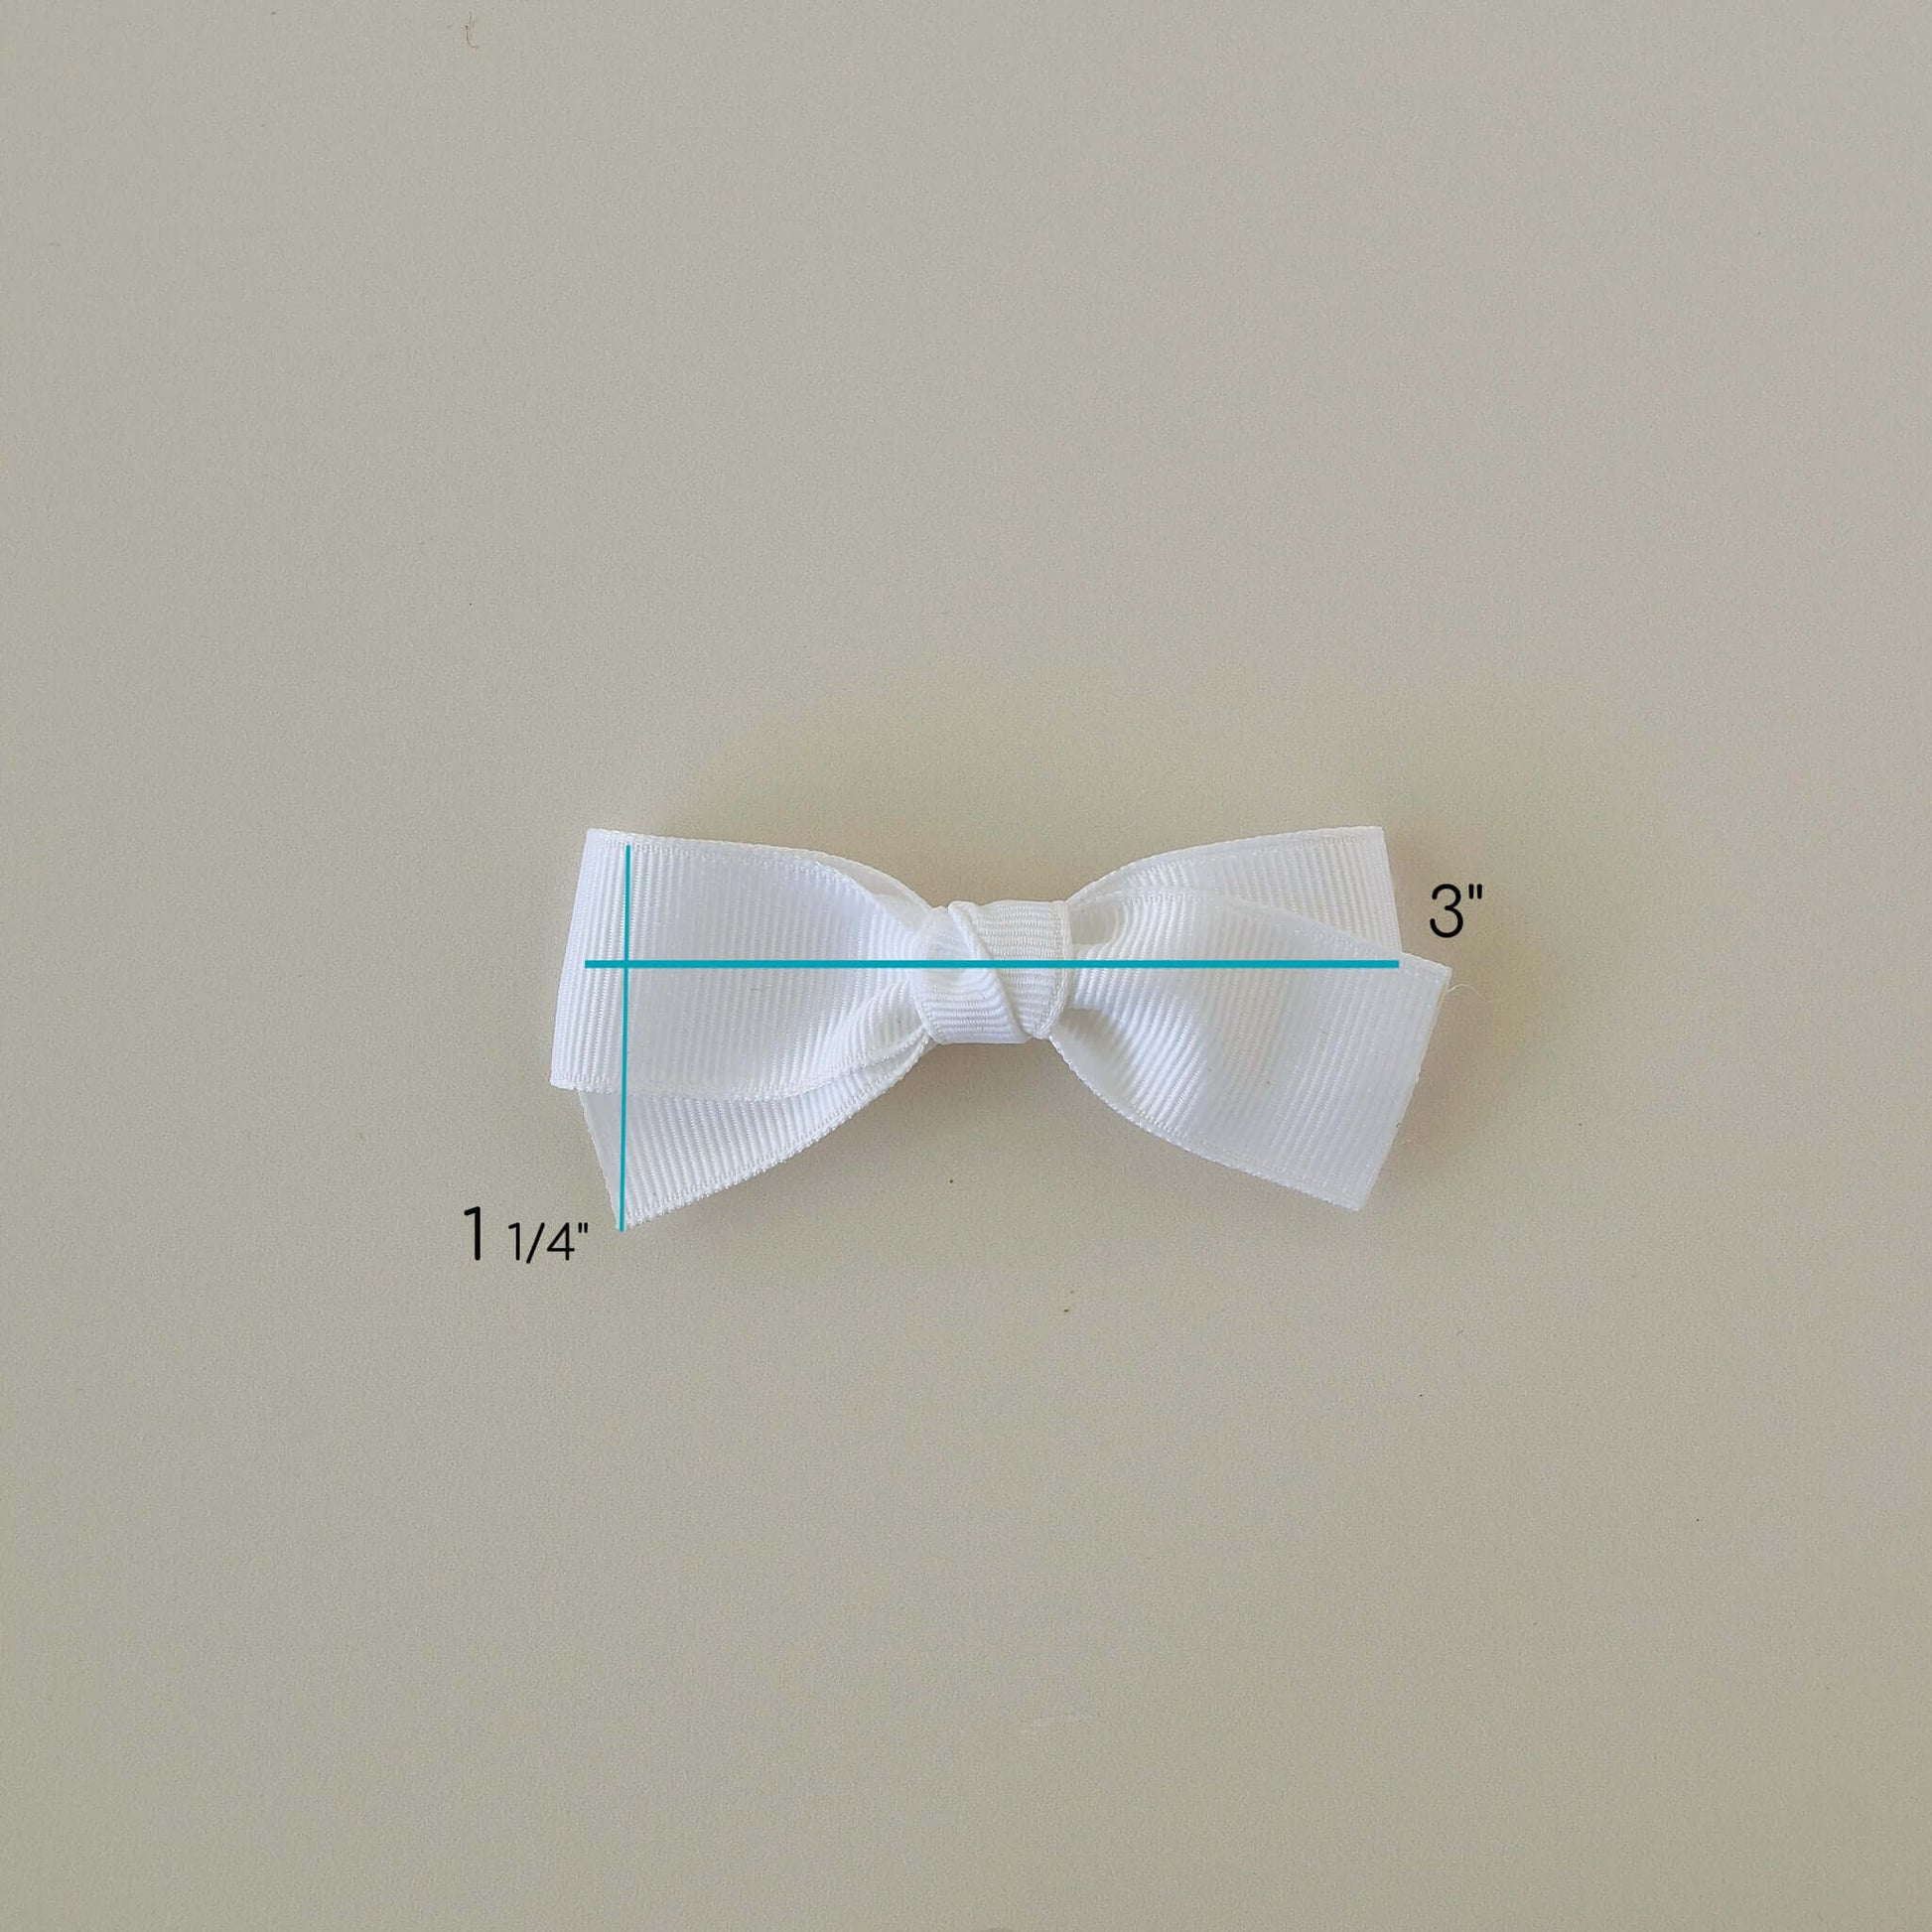 White 3 inch Grosgrain Baby Kayla Bow with alligator clip measuring guide on light background.